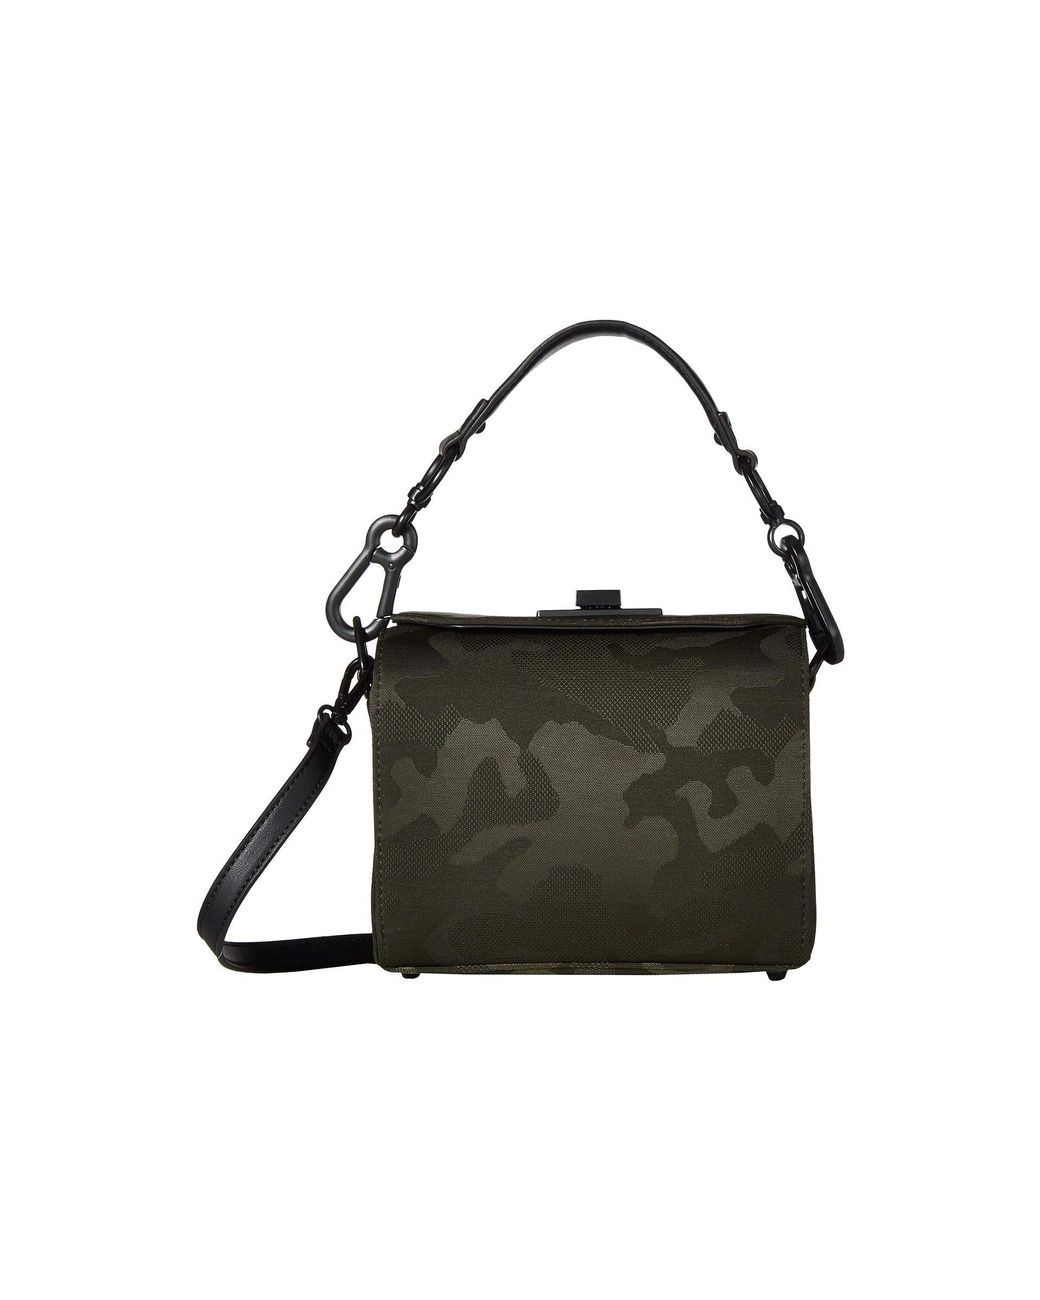 Black Real Tree Camouflage Print Handbag - $12.75 : Purse Obsession | Best Wholesale  Handbags at the Cheapest Prices